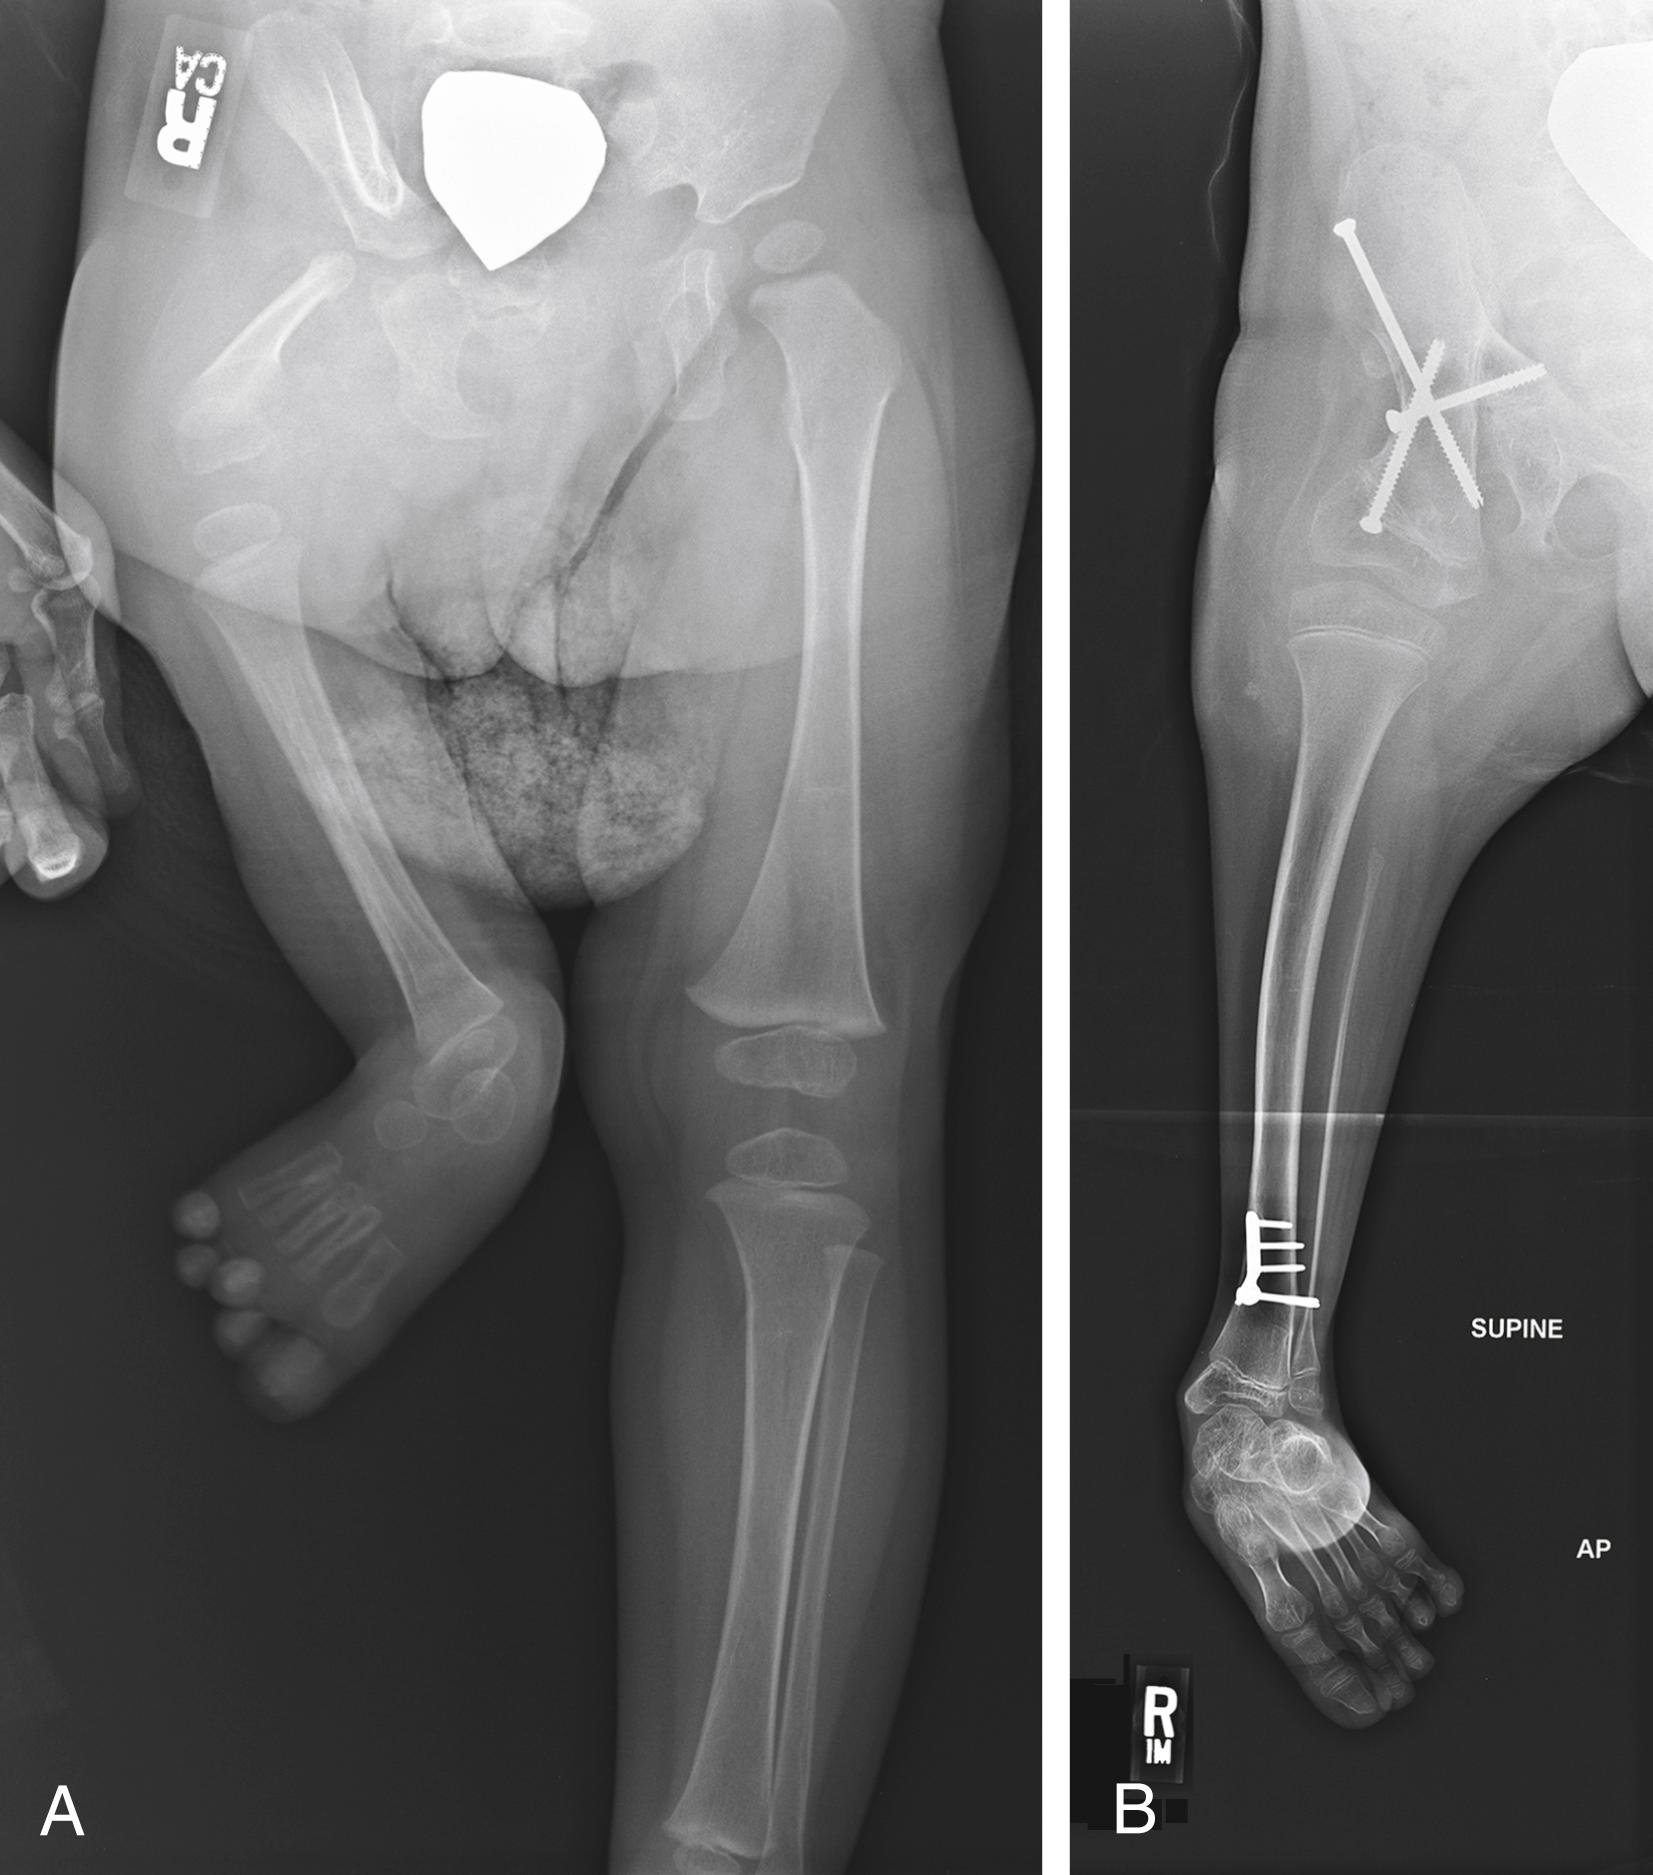 Fig. 21.24, (A) 16-month-old girl with a right proximal femoral deficiency. There is no ossification of the femoral head and the acetabulum is poorly formed. Magnetic resonance images did not show a femoral head. (B) A radiograph of the right lower extremity after rotation and fusion of the femur to the pelvis. Additional rotation was done at the distal tibia.